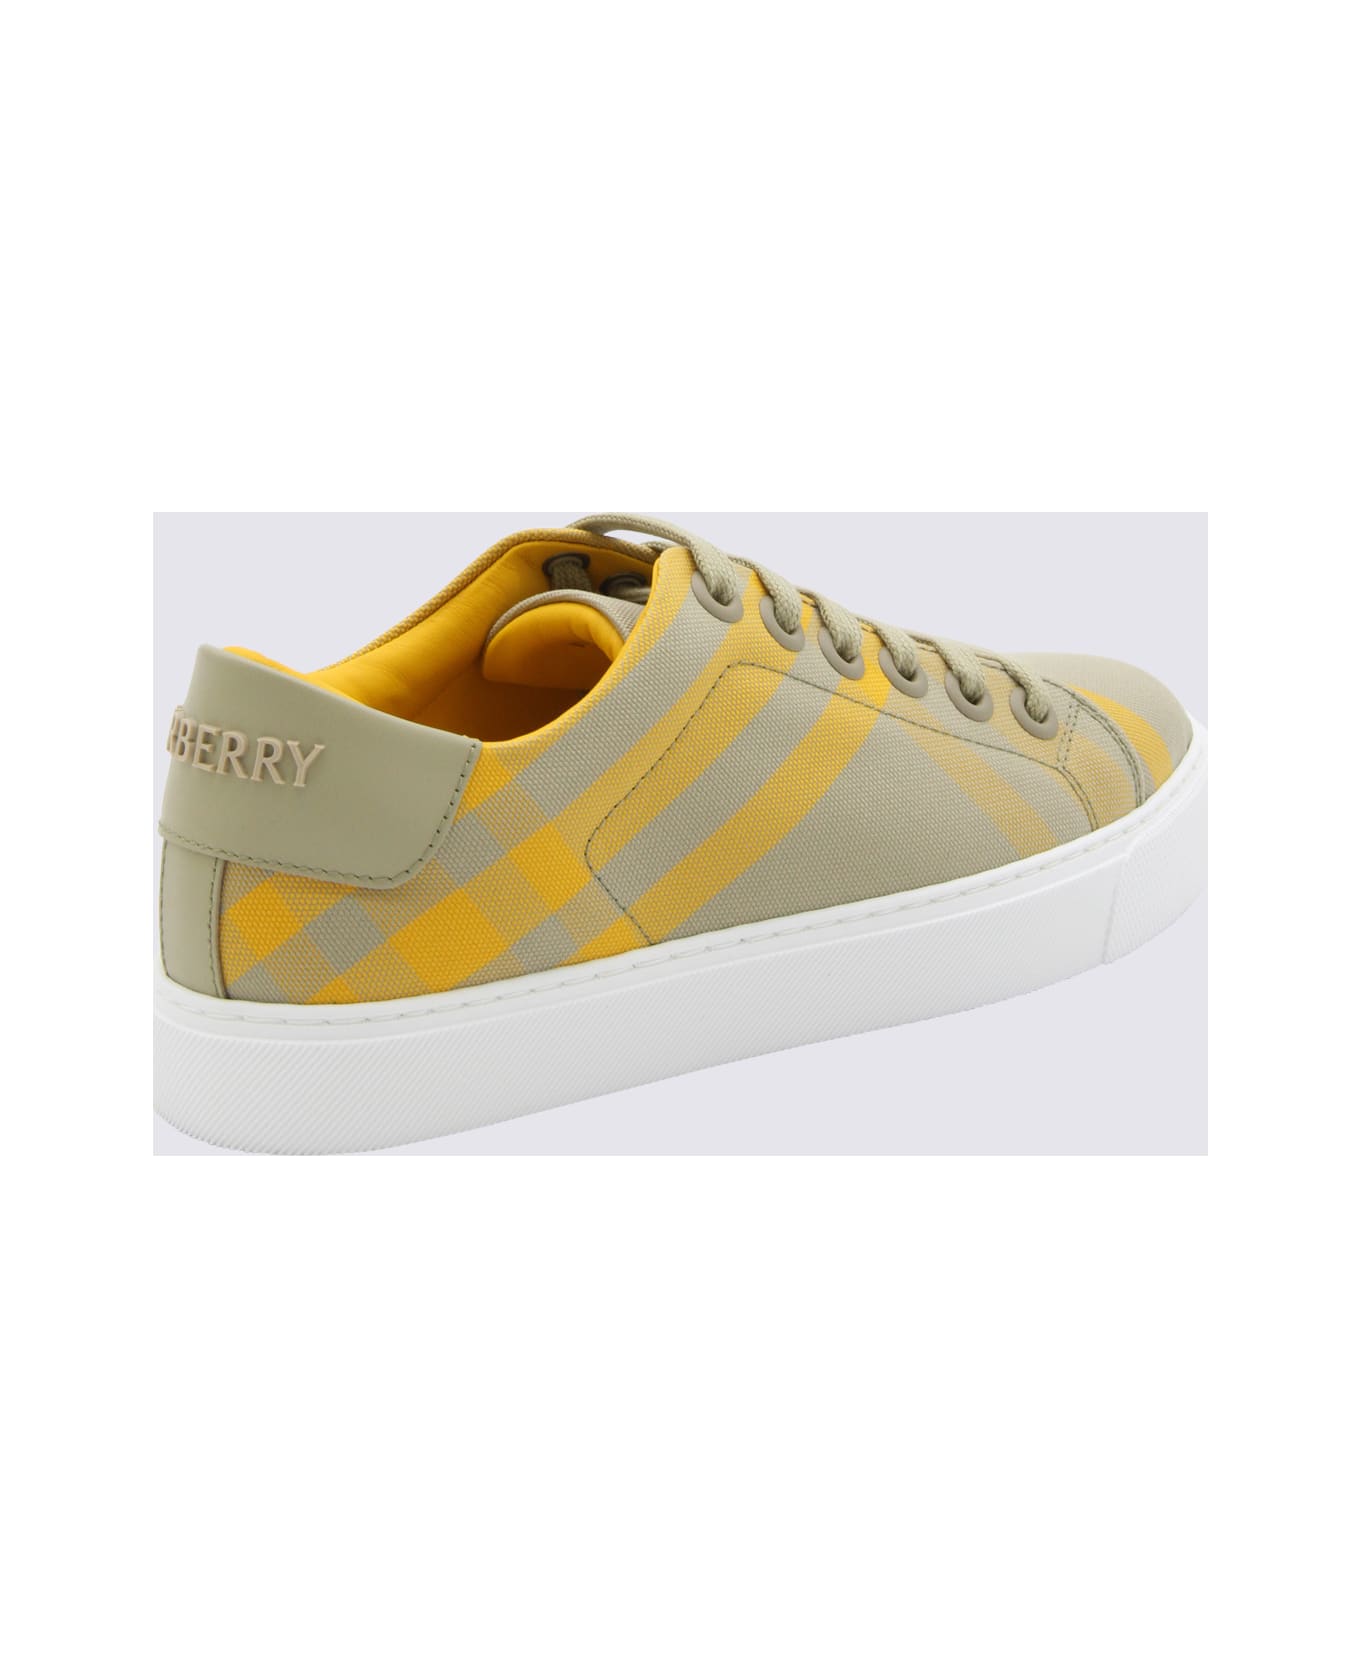 Burberry Hunter Ip Check Canvas Sneakers - HUNTER IP CHECK